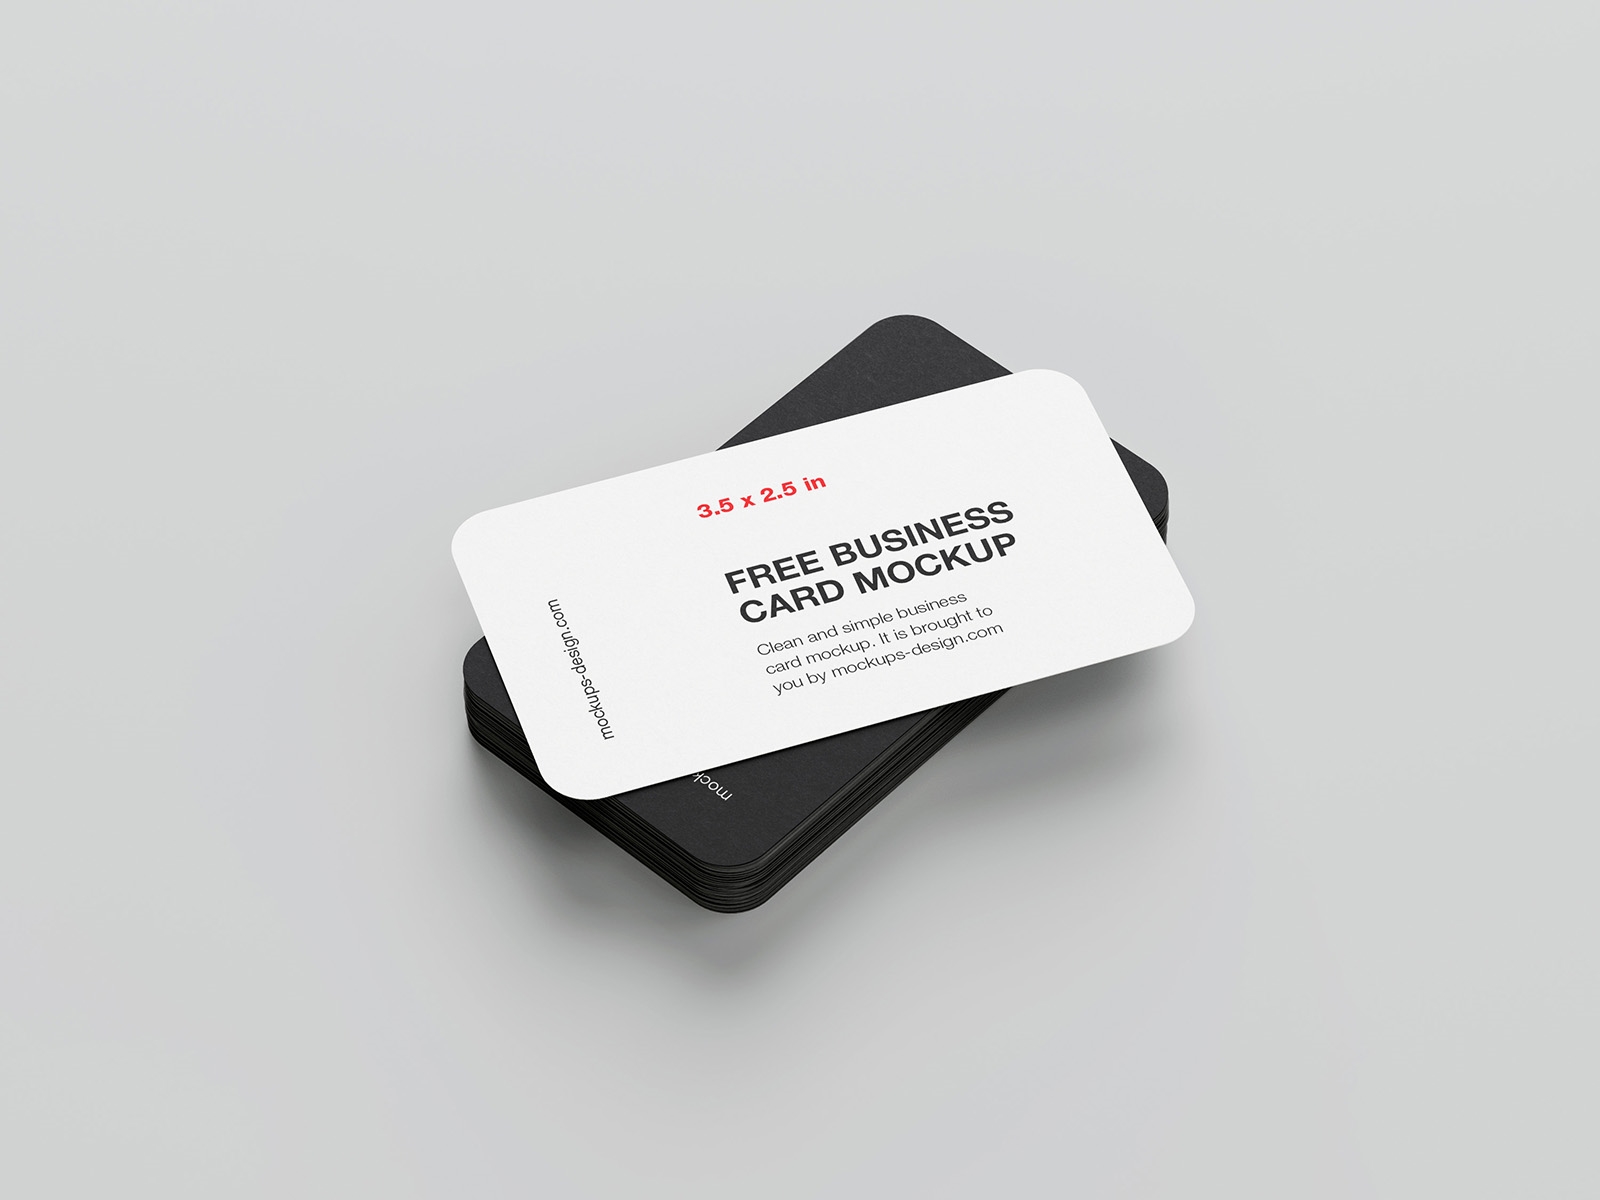 6 Rounded Business Cards Mockups in Top and Perspective Sight FREE PSD